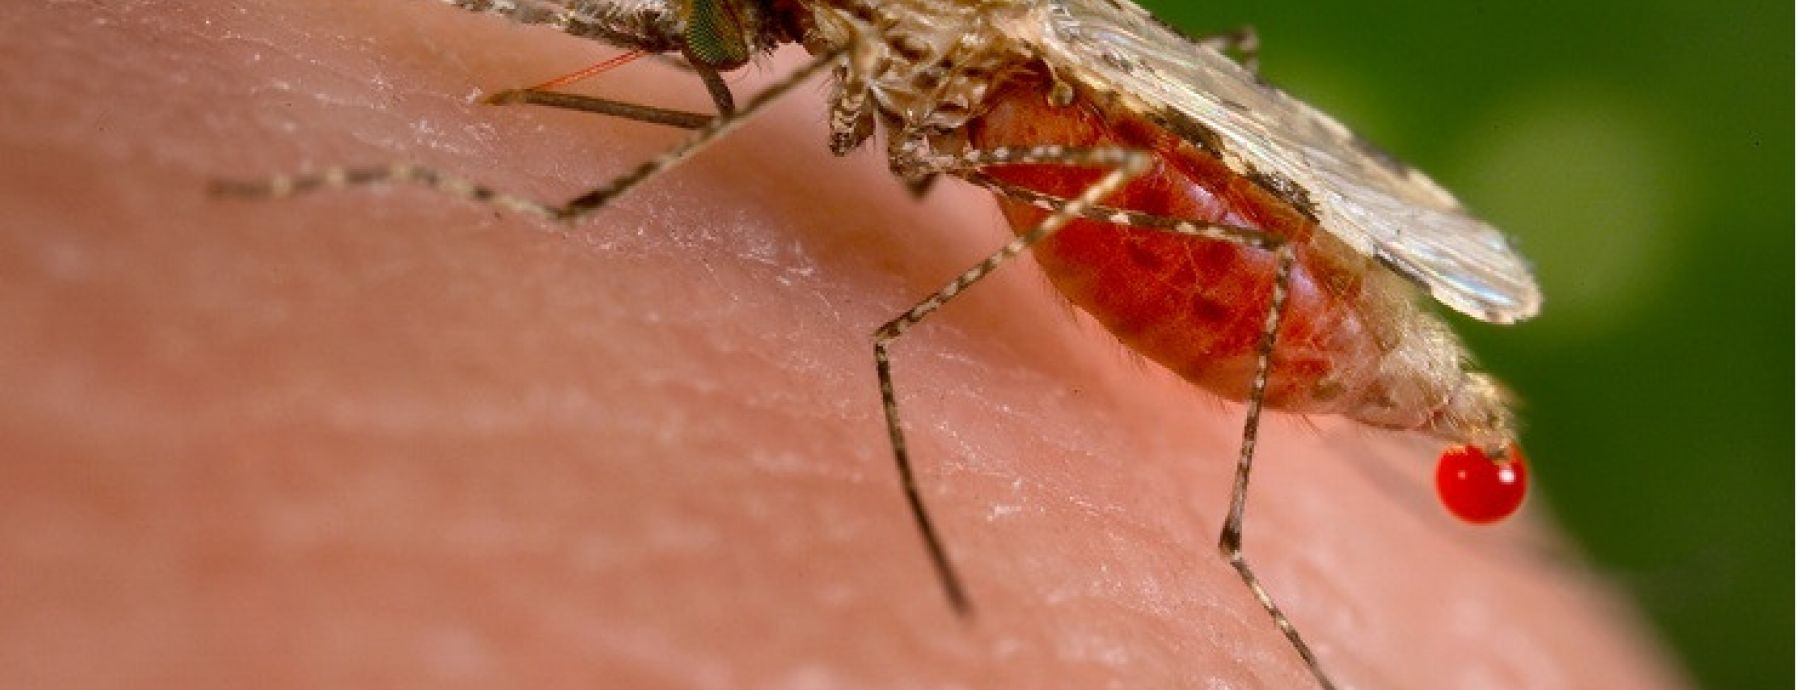 New targets for malaria vaccines